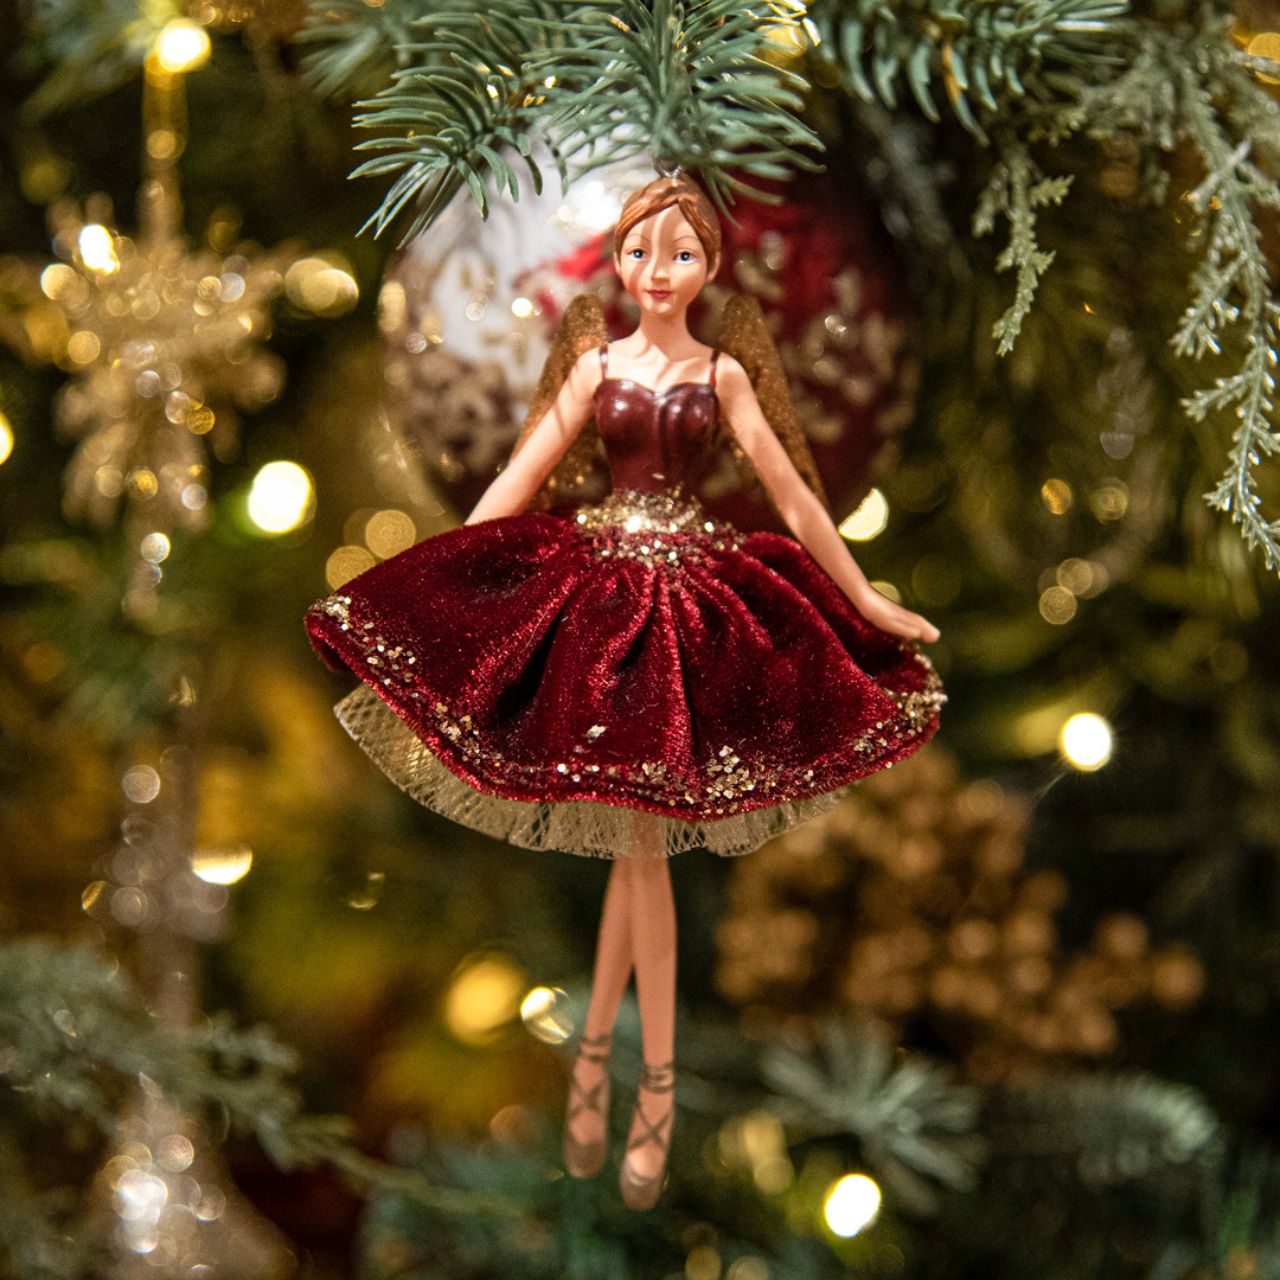 Gisela Graham Luxury Burgundy Velvet Fairy Hanging Ornaments 13 cm  Browse our beautiful range of luxury Christmas tree decorations, baubles & ornaments for your tree this Christmas.